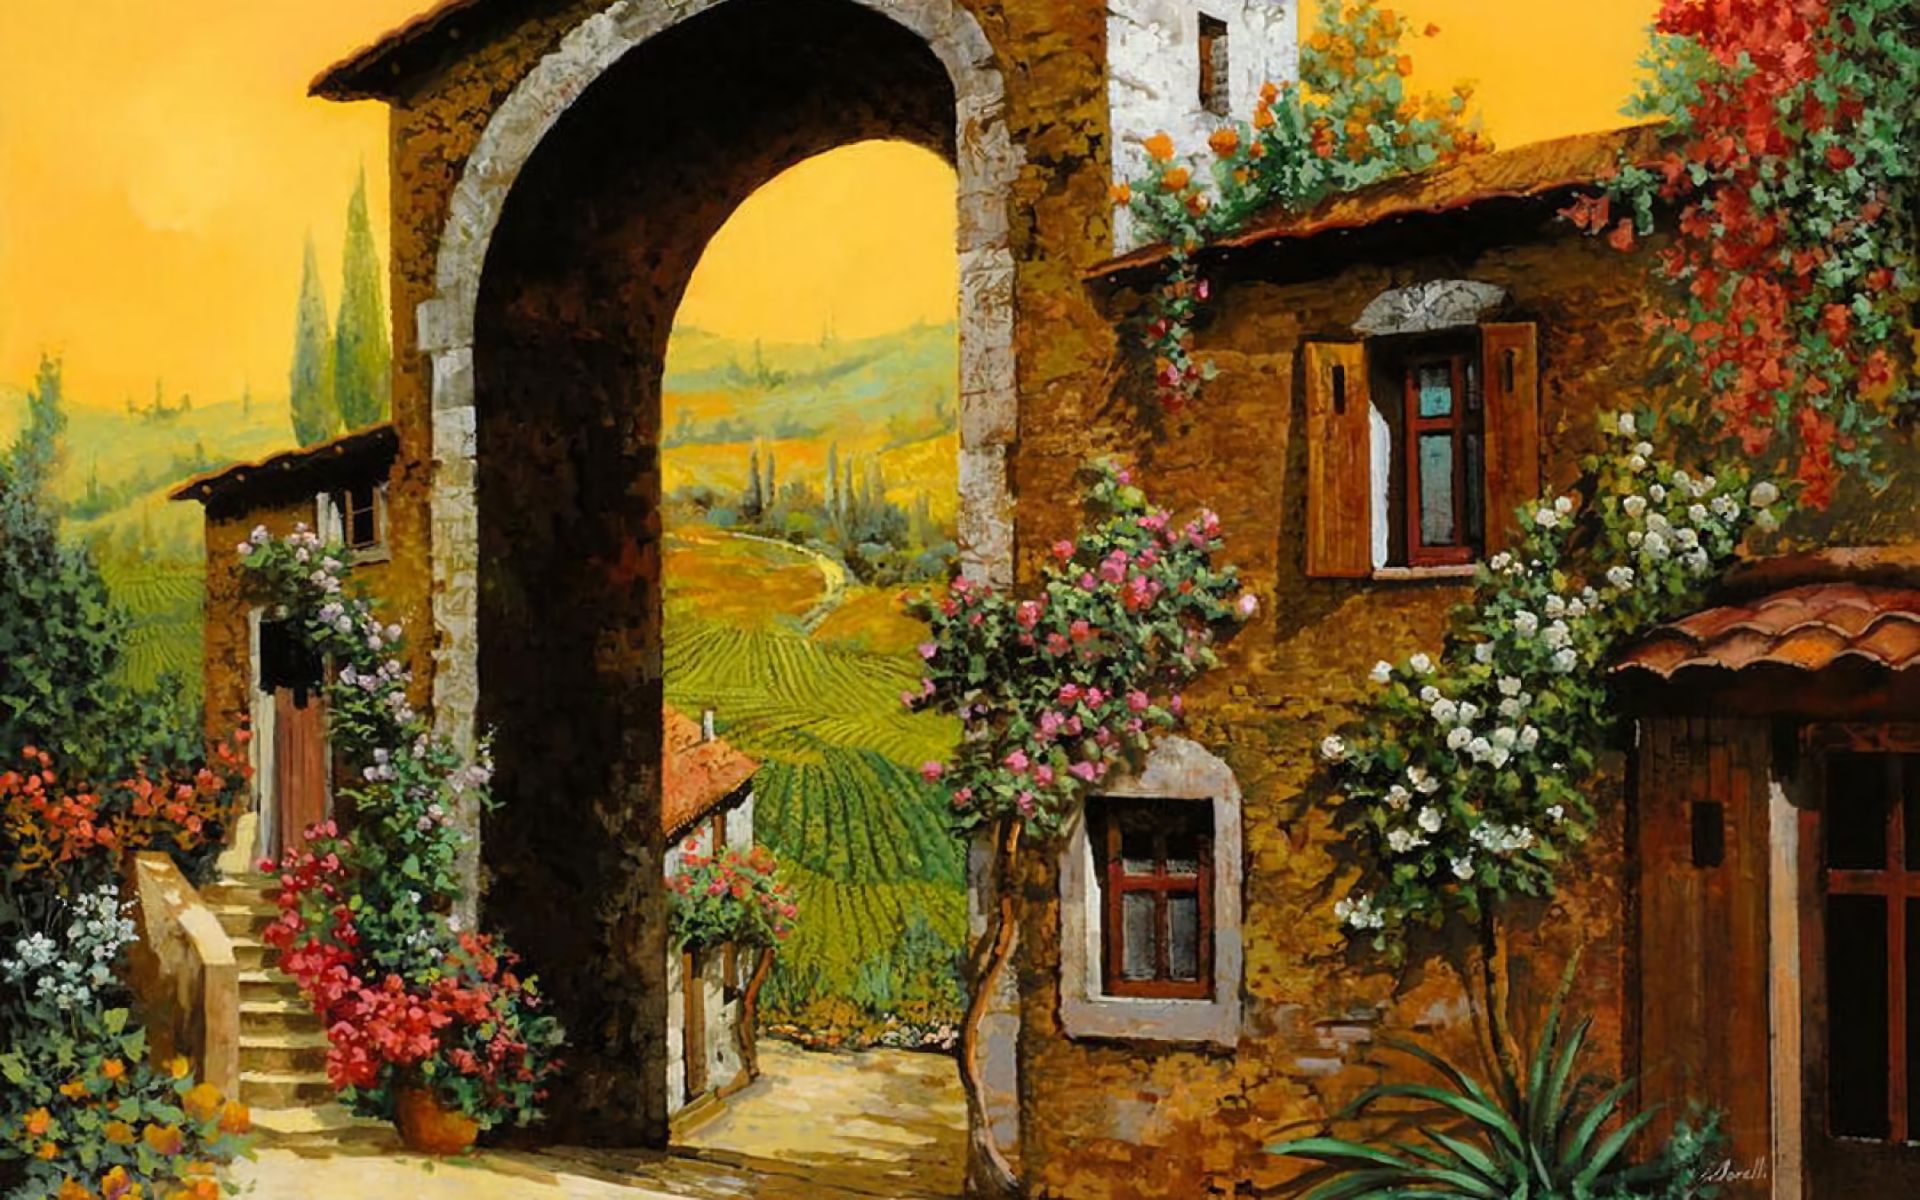 tuscany, artistic, painting, arch, flower, house, italy